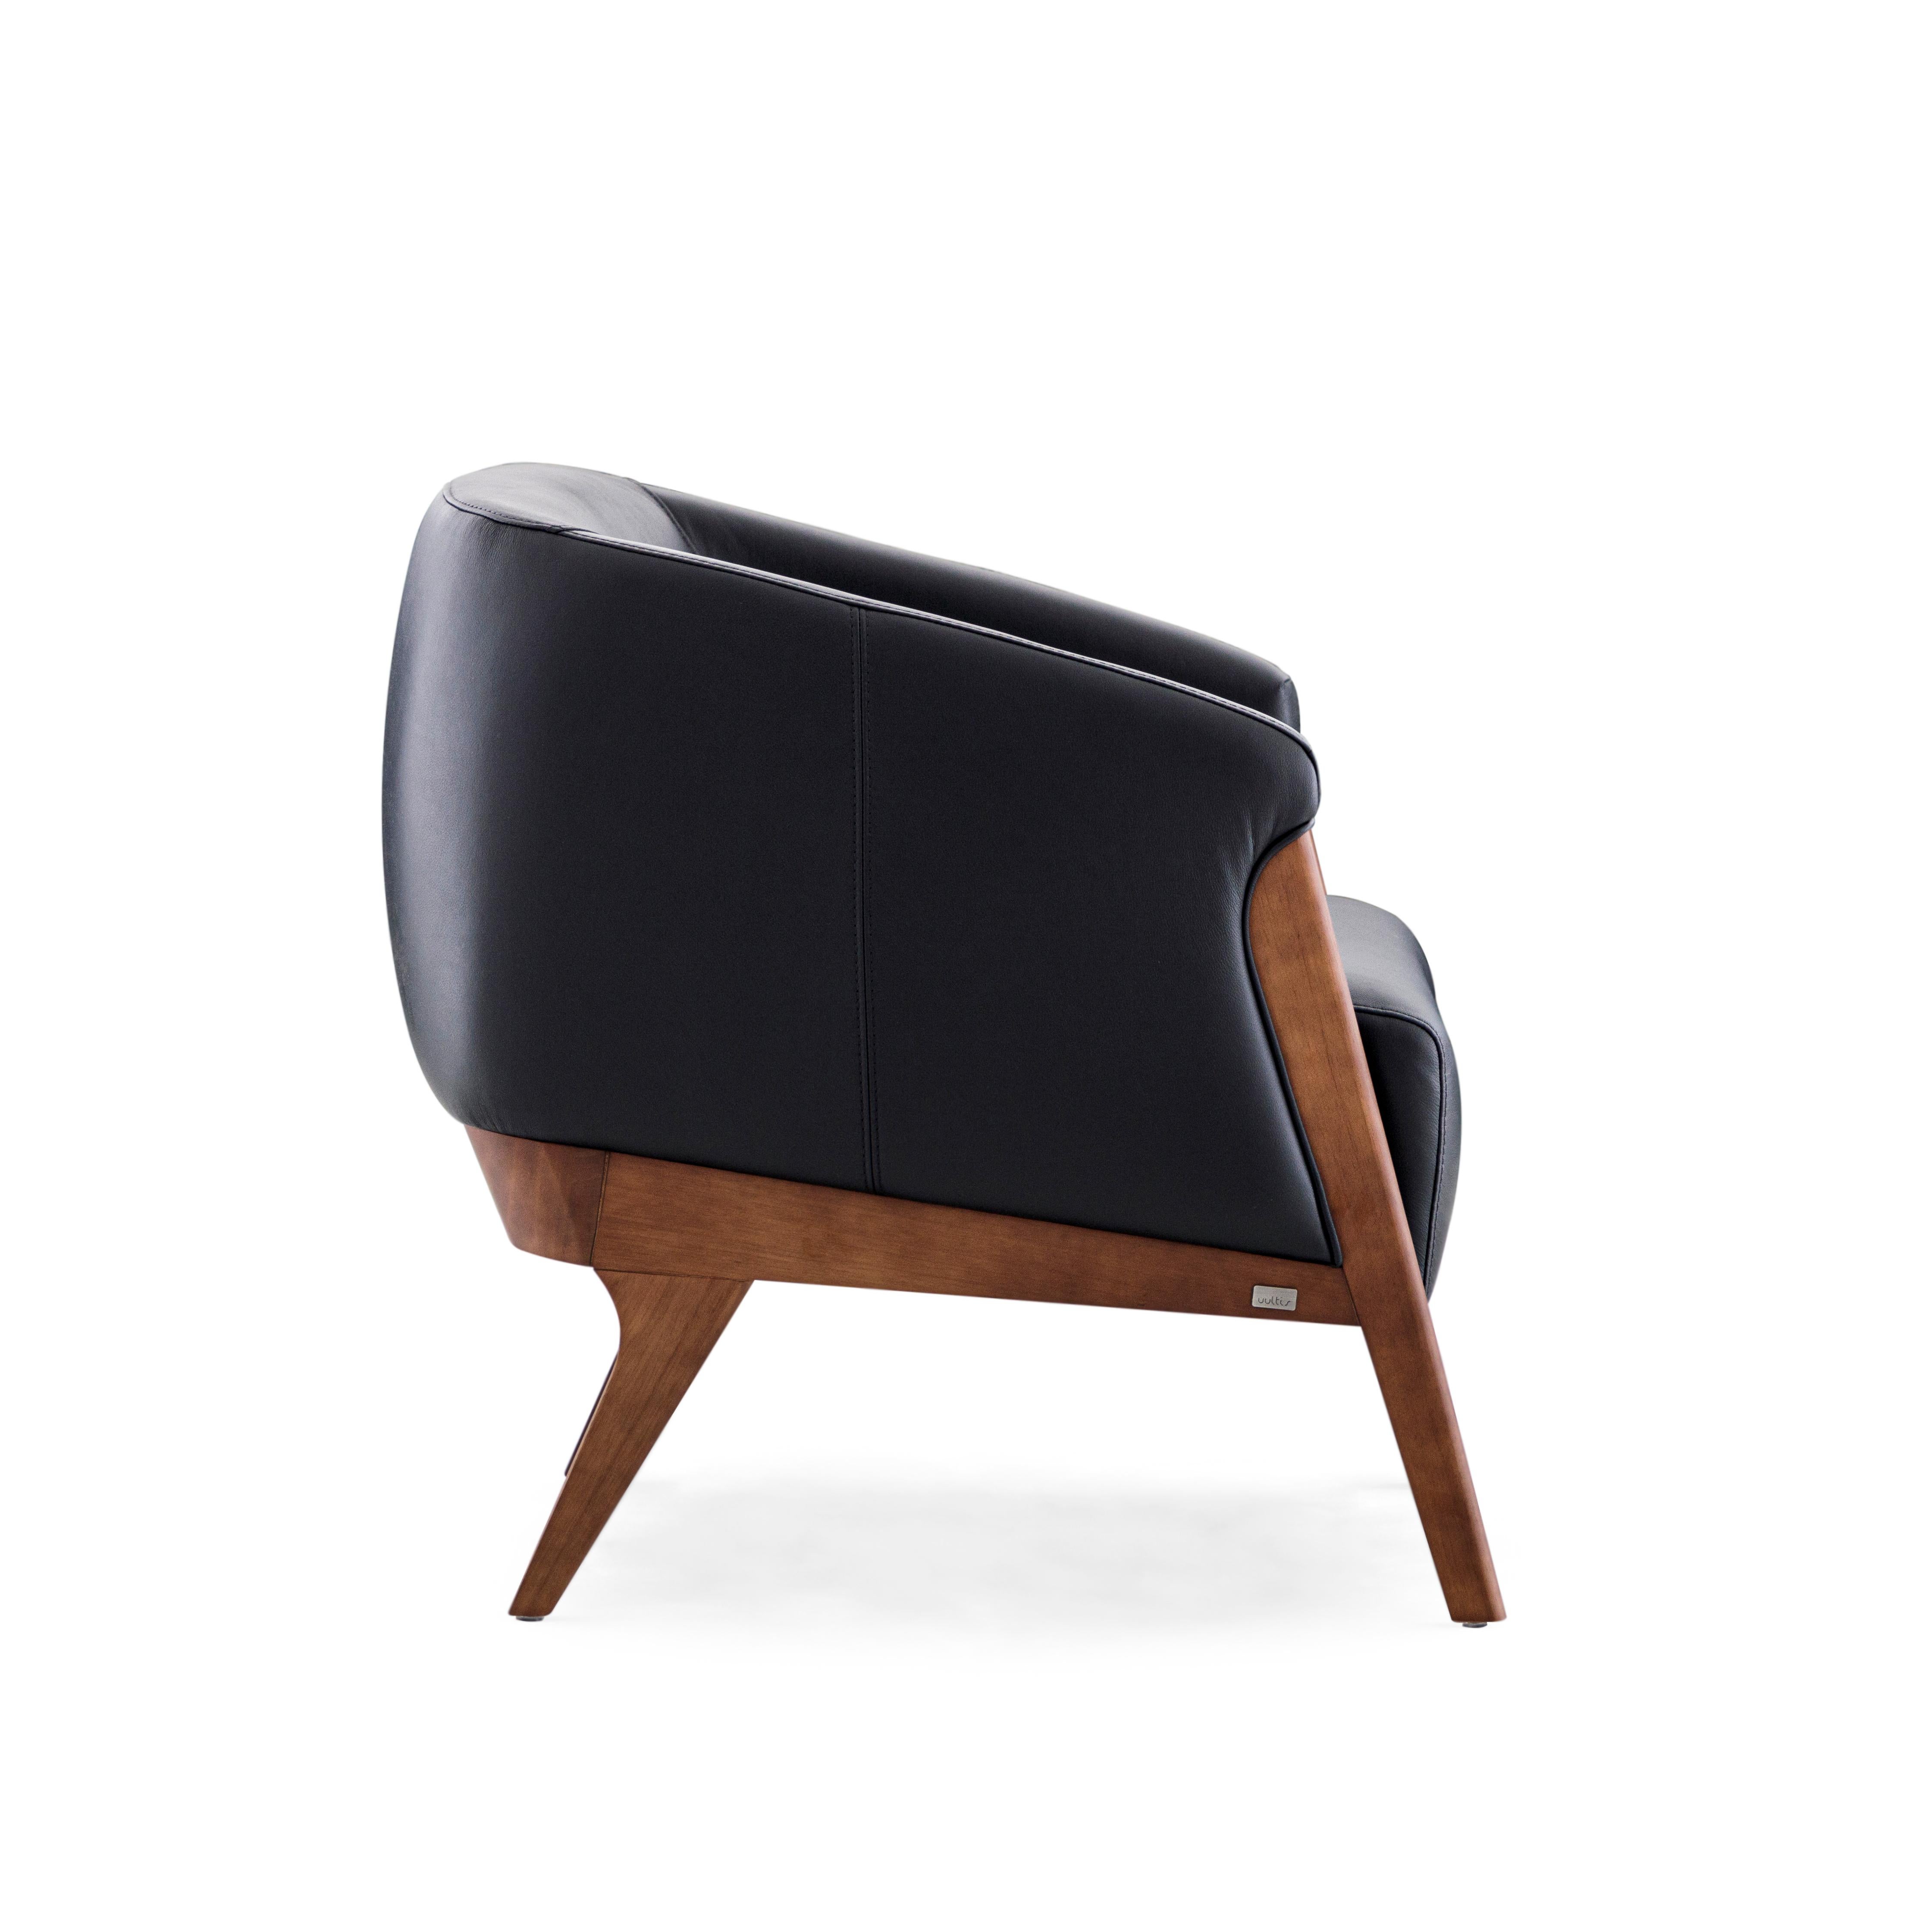 The Abra armchair is a welcoming addition to any room in your decor, with beautiful black upholstery and a walnut wood finish frame. This armchair has been created by our amazing team of architectors and designers from Uultis in order to bring